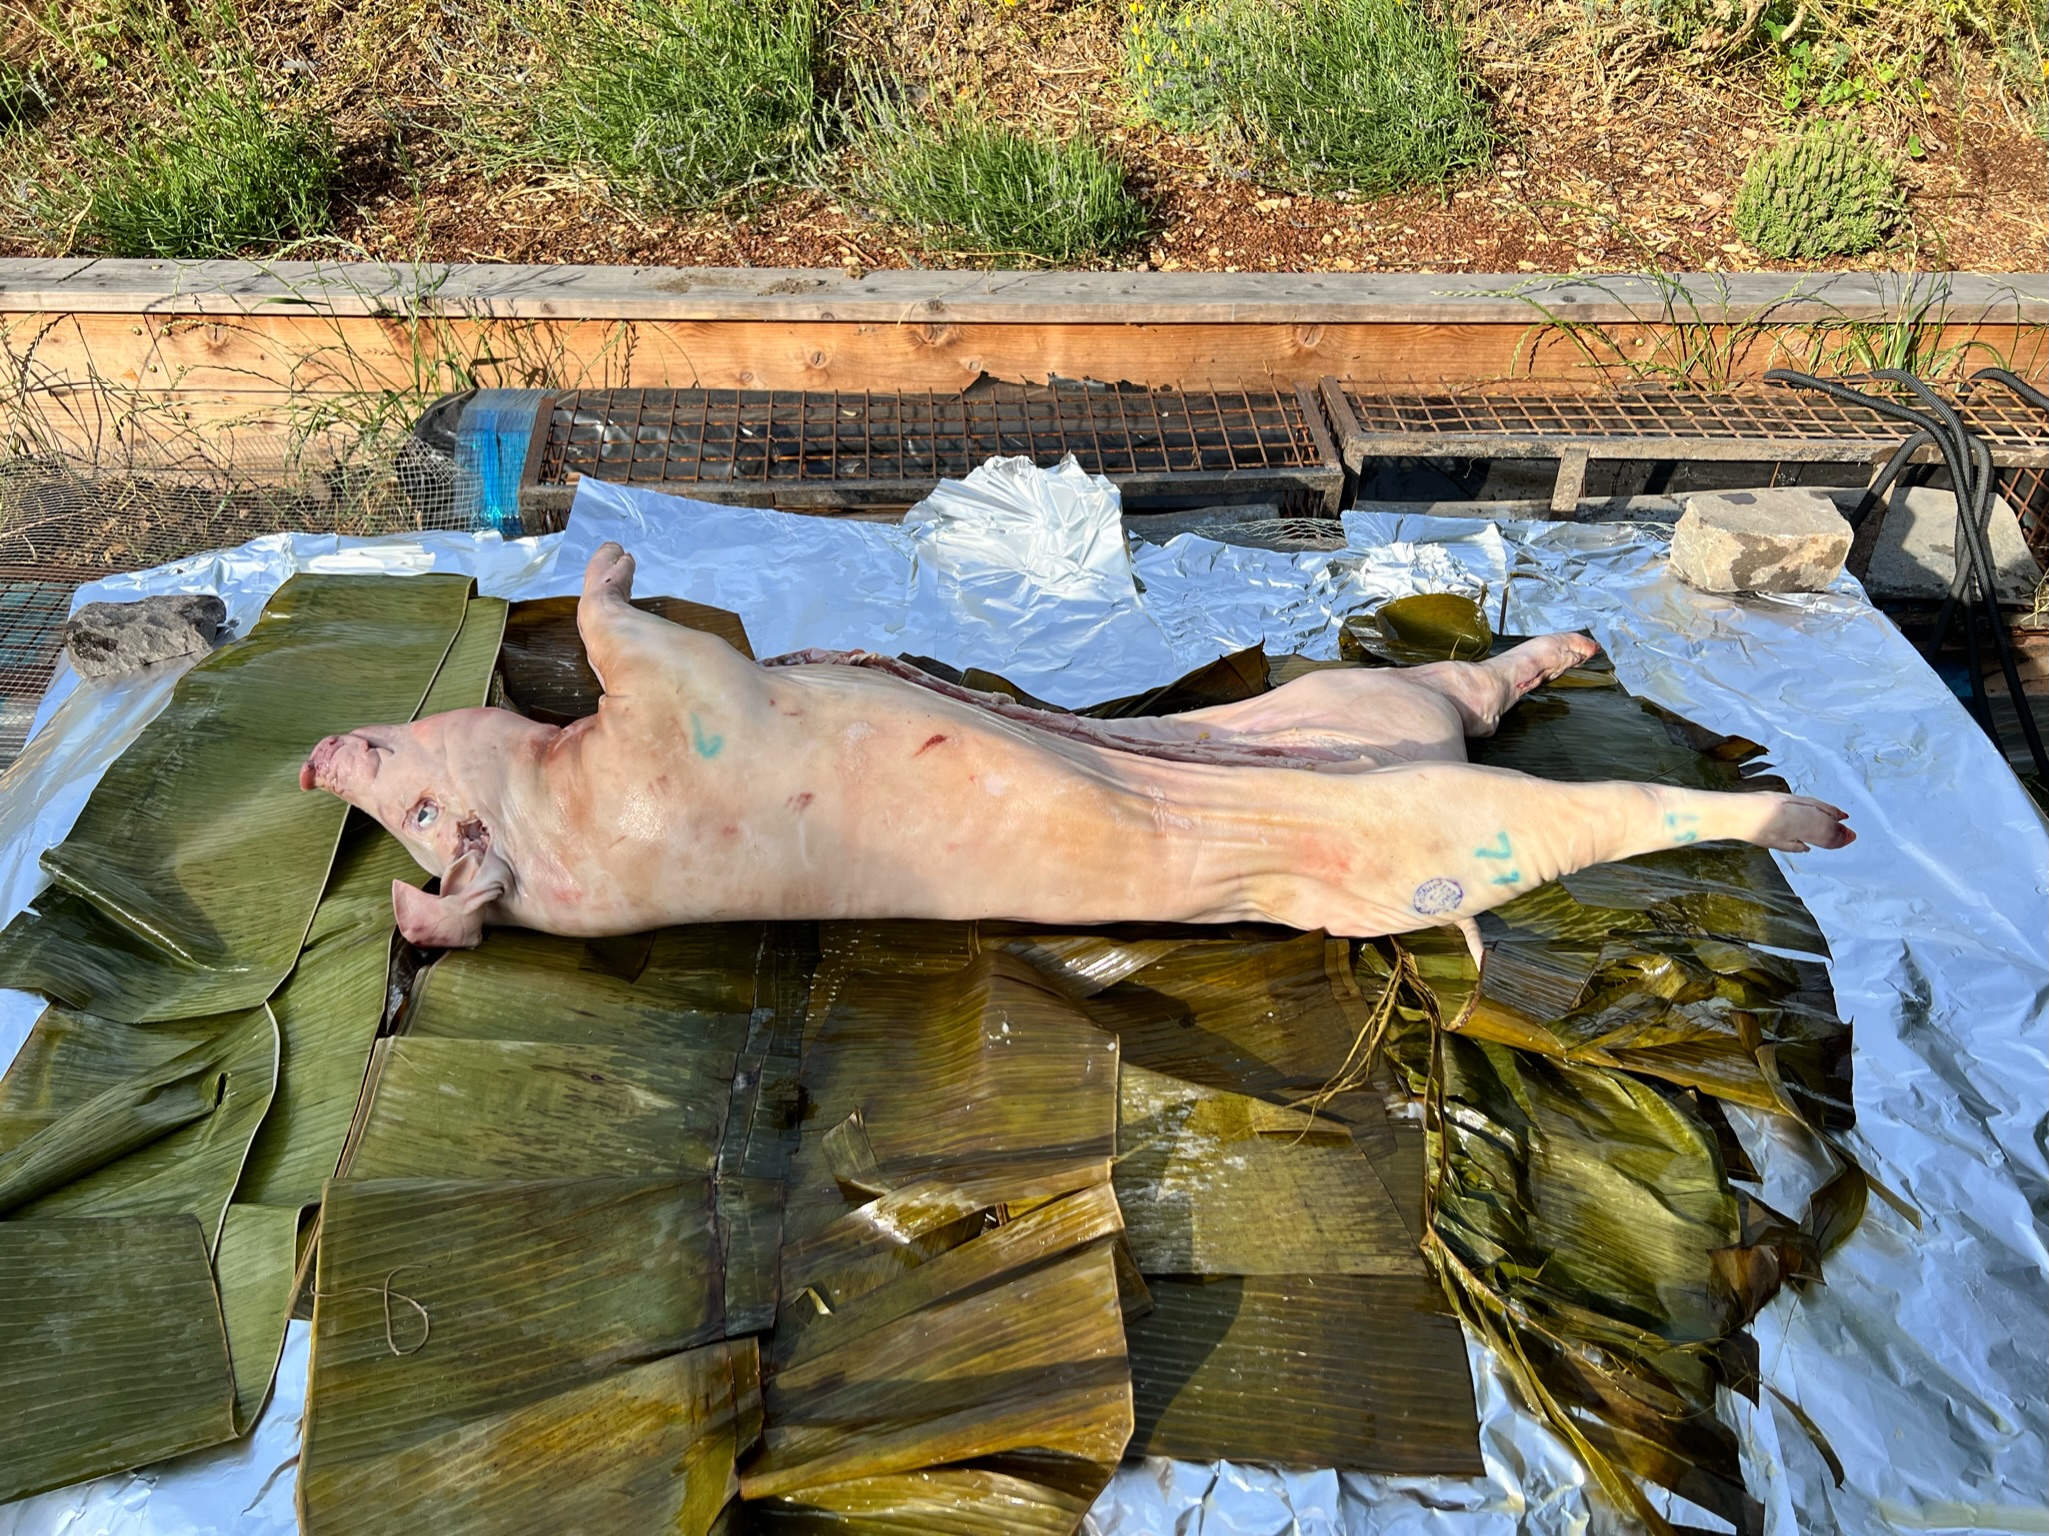 Pig ready to be wrapped. Lying on banana leaves and foil.